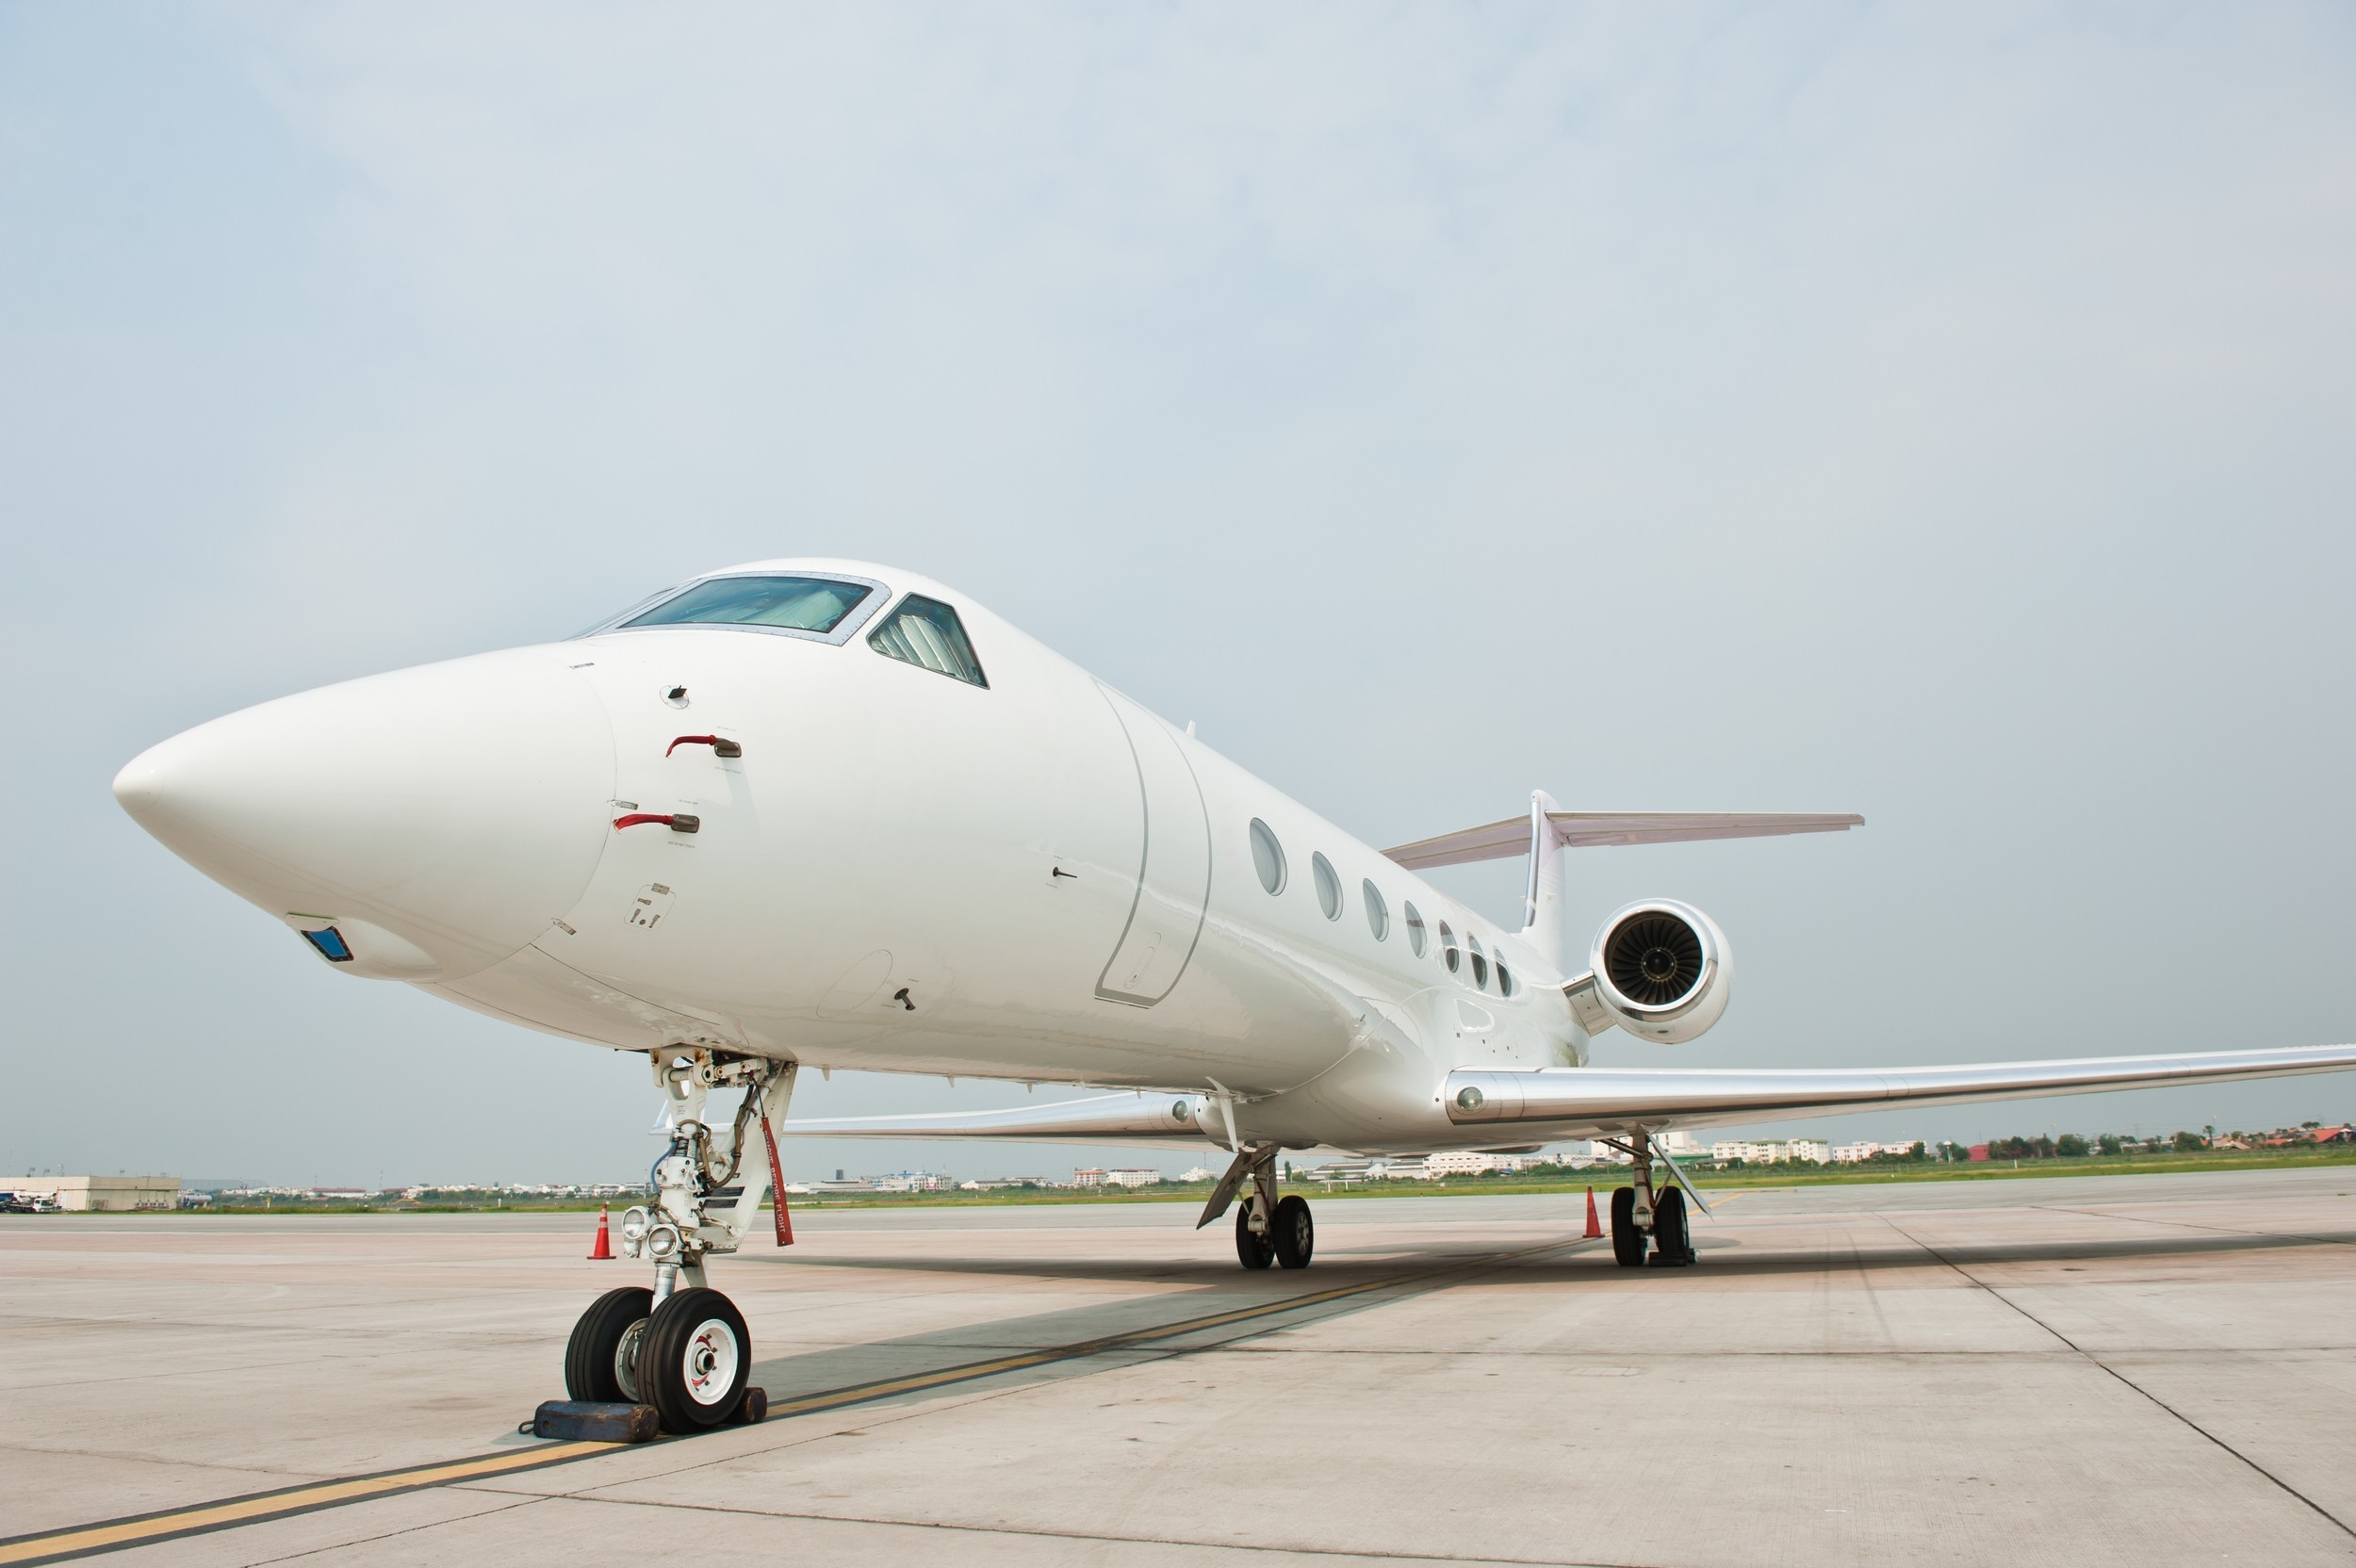 How Much Does It Cost to Charter a Private Jet?